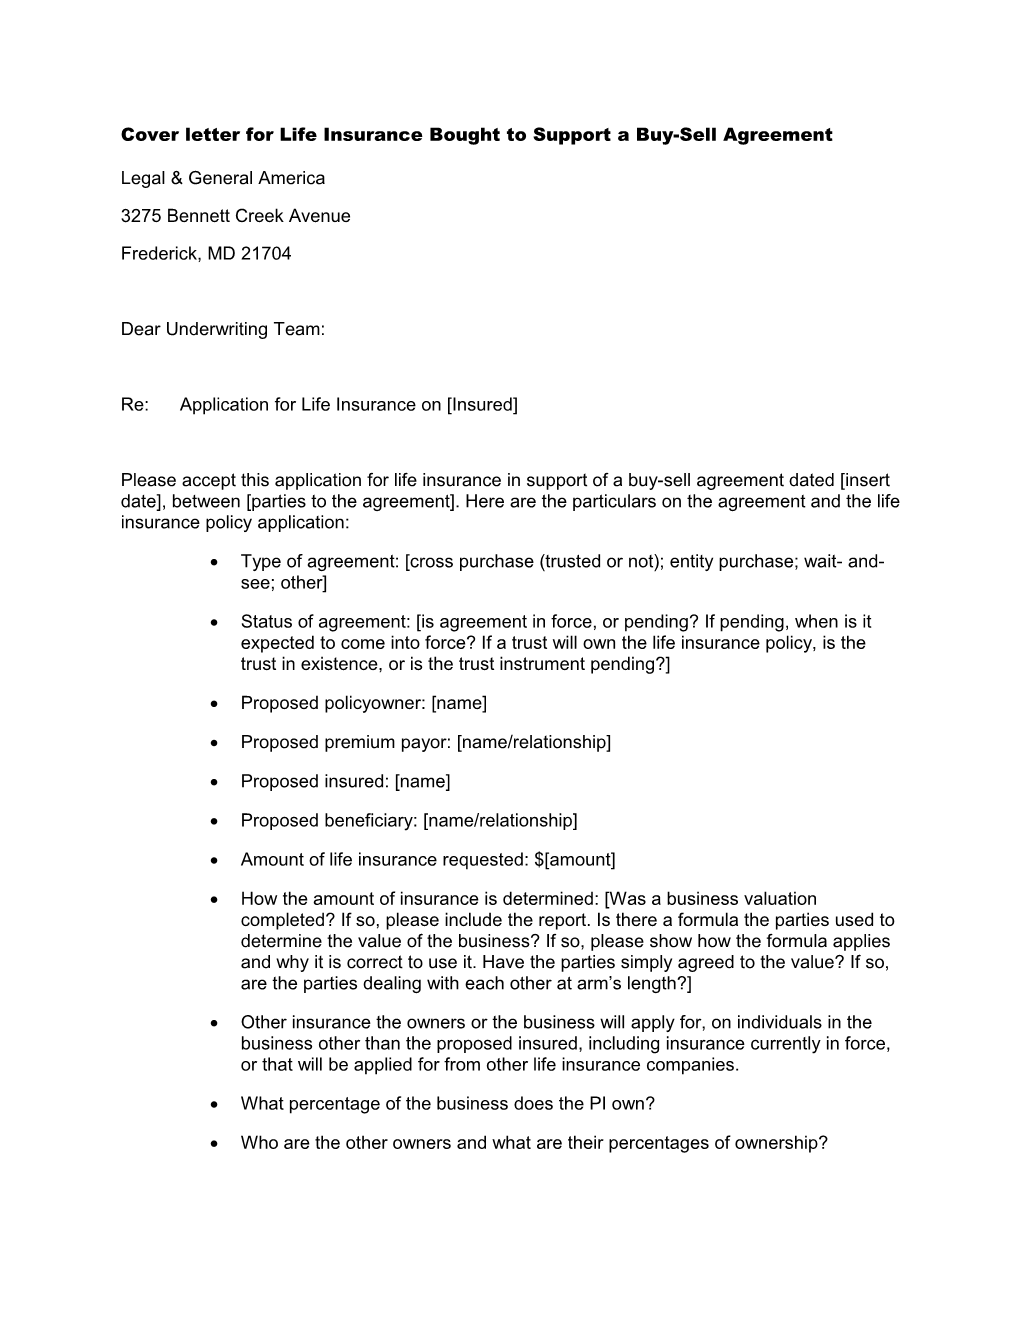 Cover Letter for Life Insurance Bought to Support a Buy-Sell Agreement